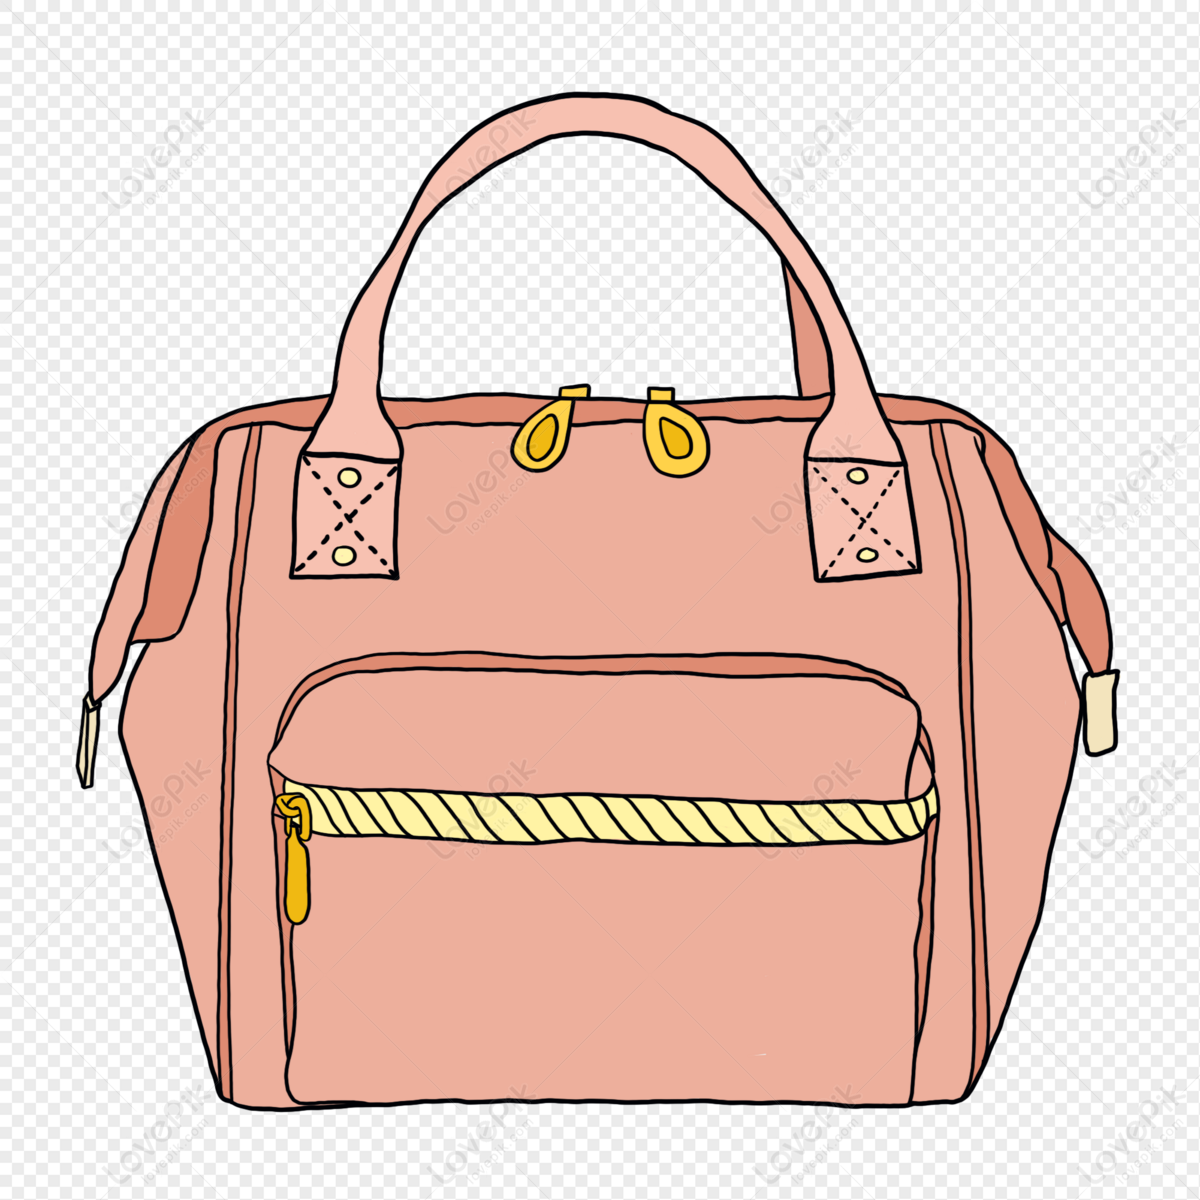 Women Bag Png Picture - Ladies Hand Bag Png - Free Transparent PNG Download  - PNGkey